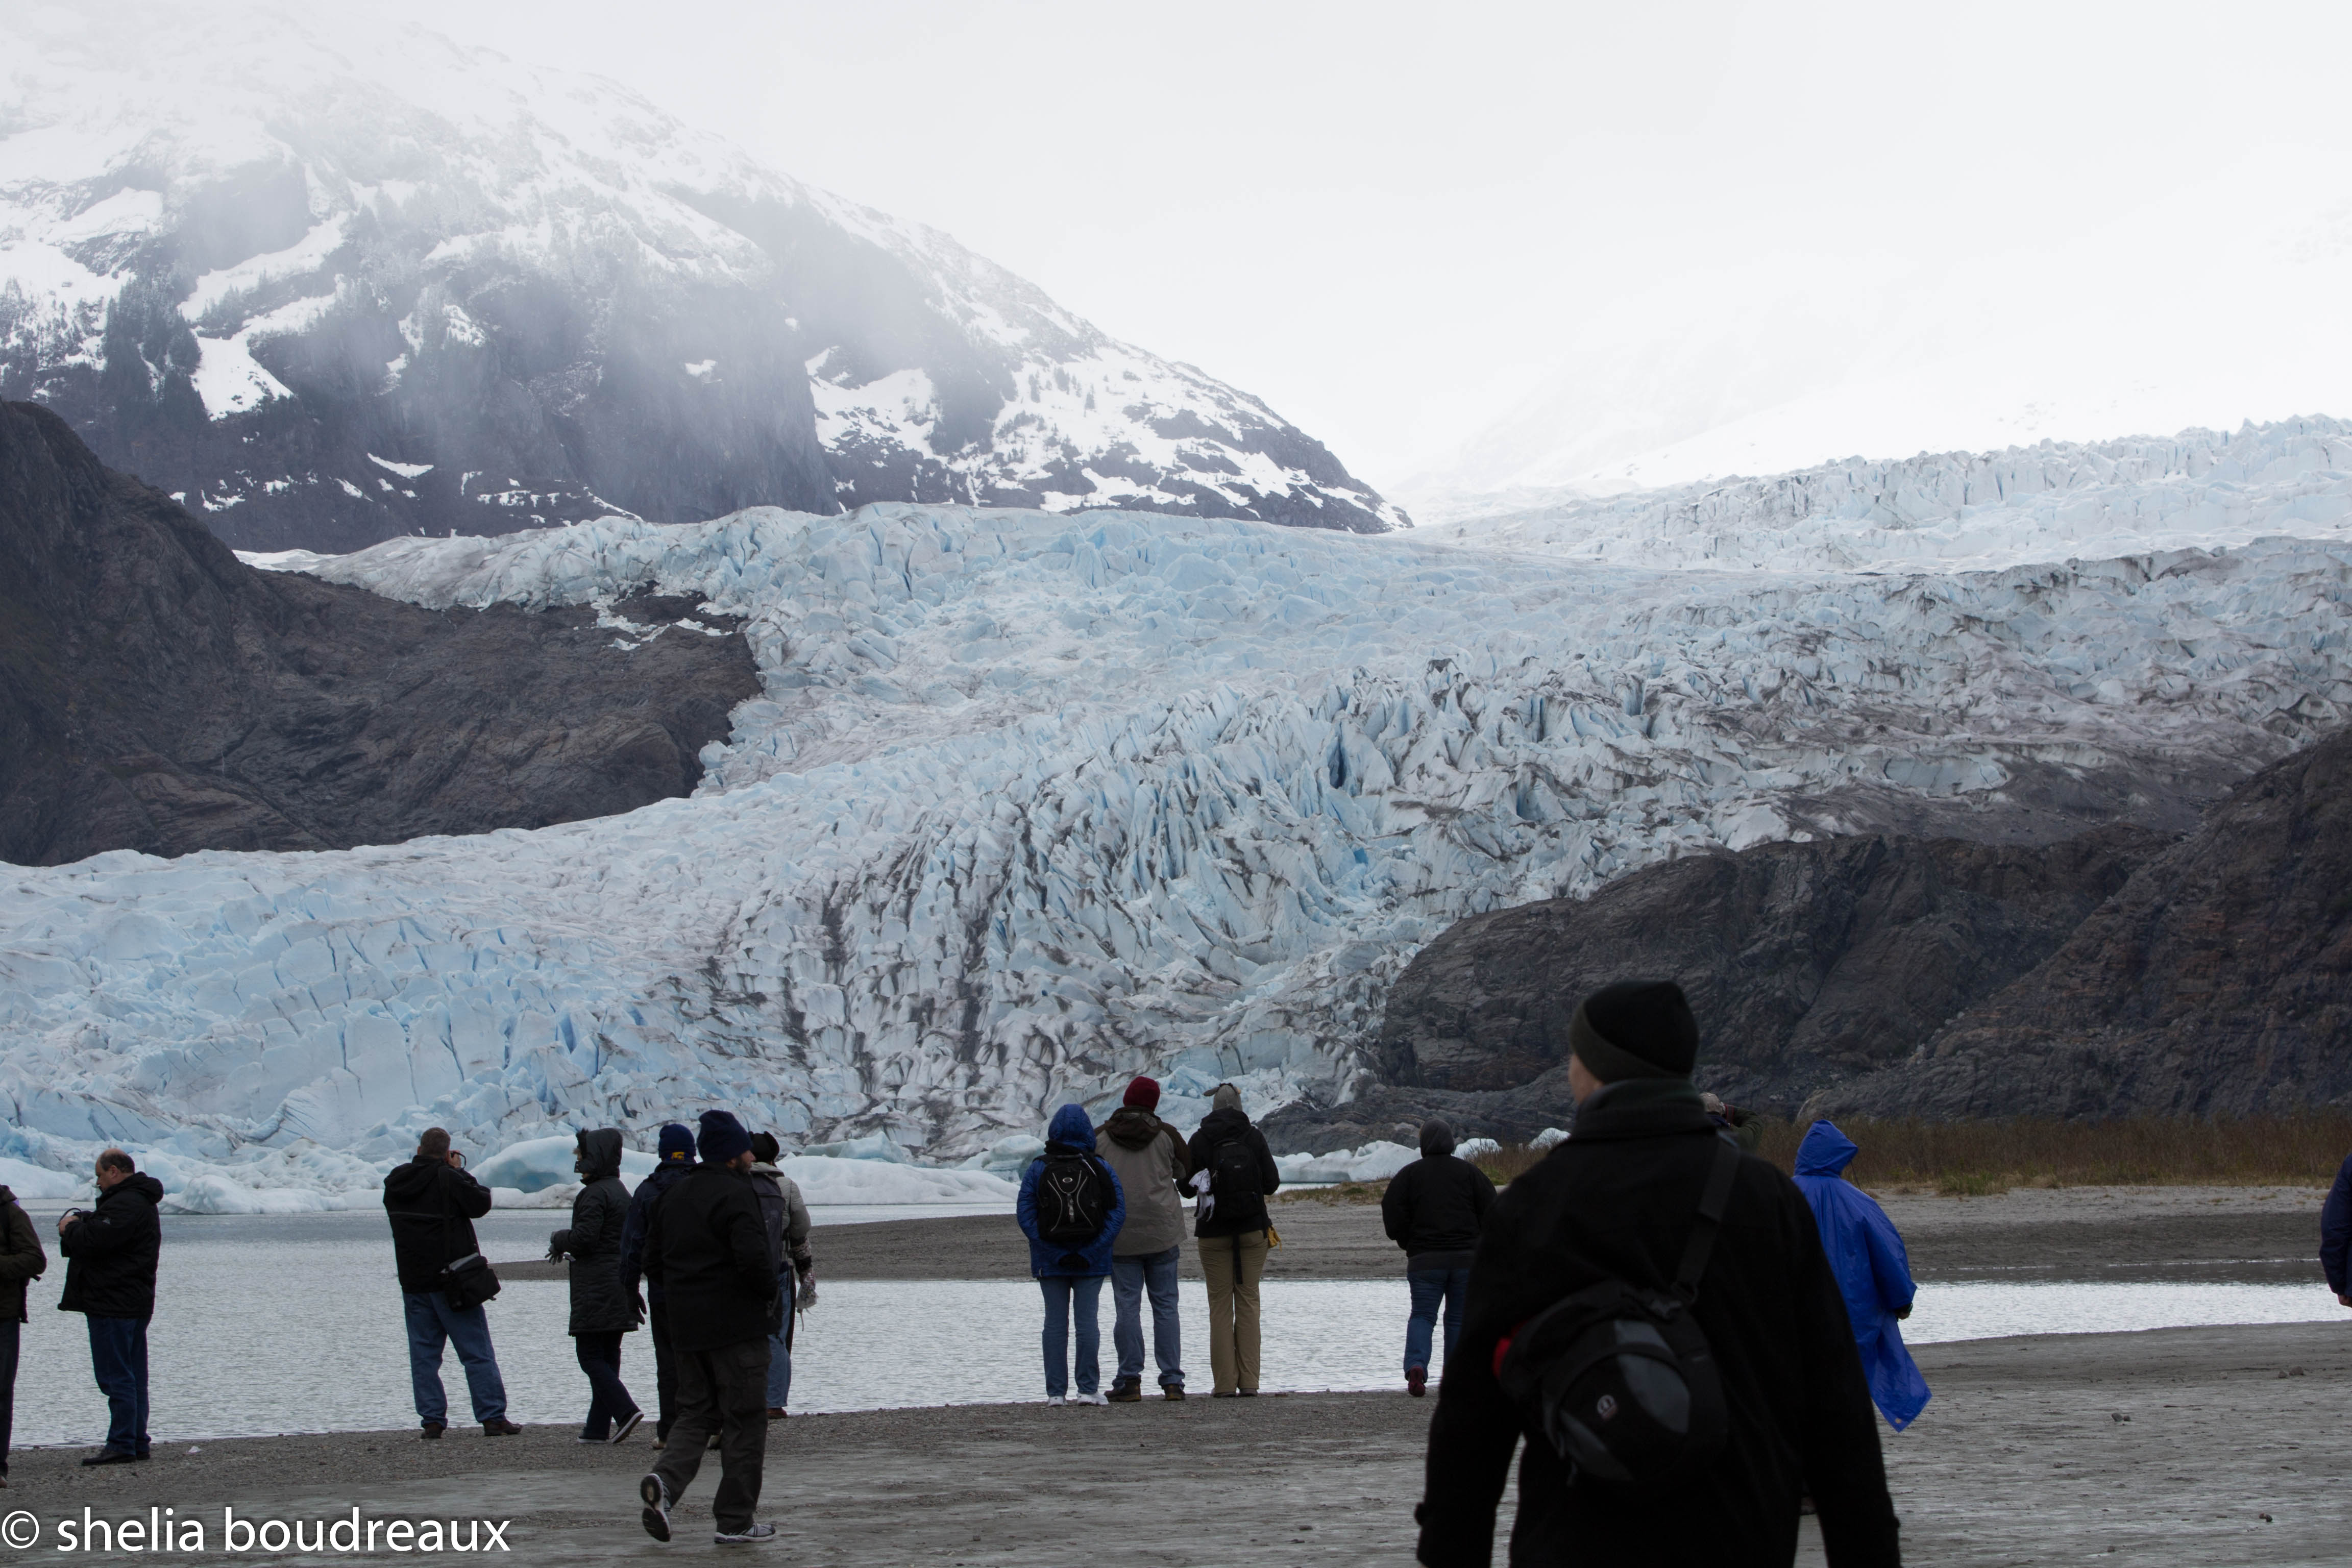 The guide said it was one mile from where we were standing. That is how big the glacier is!!